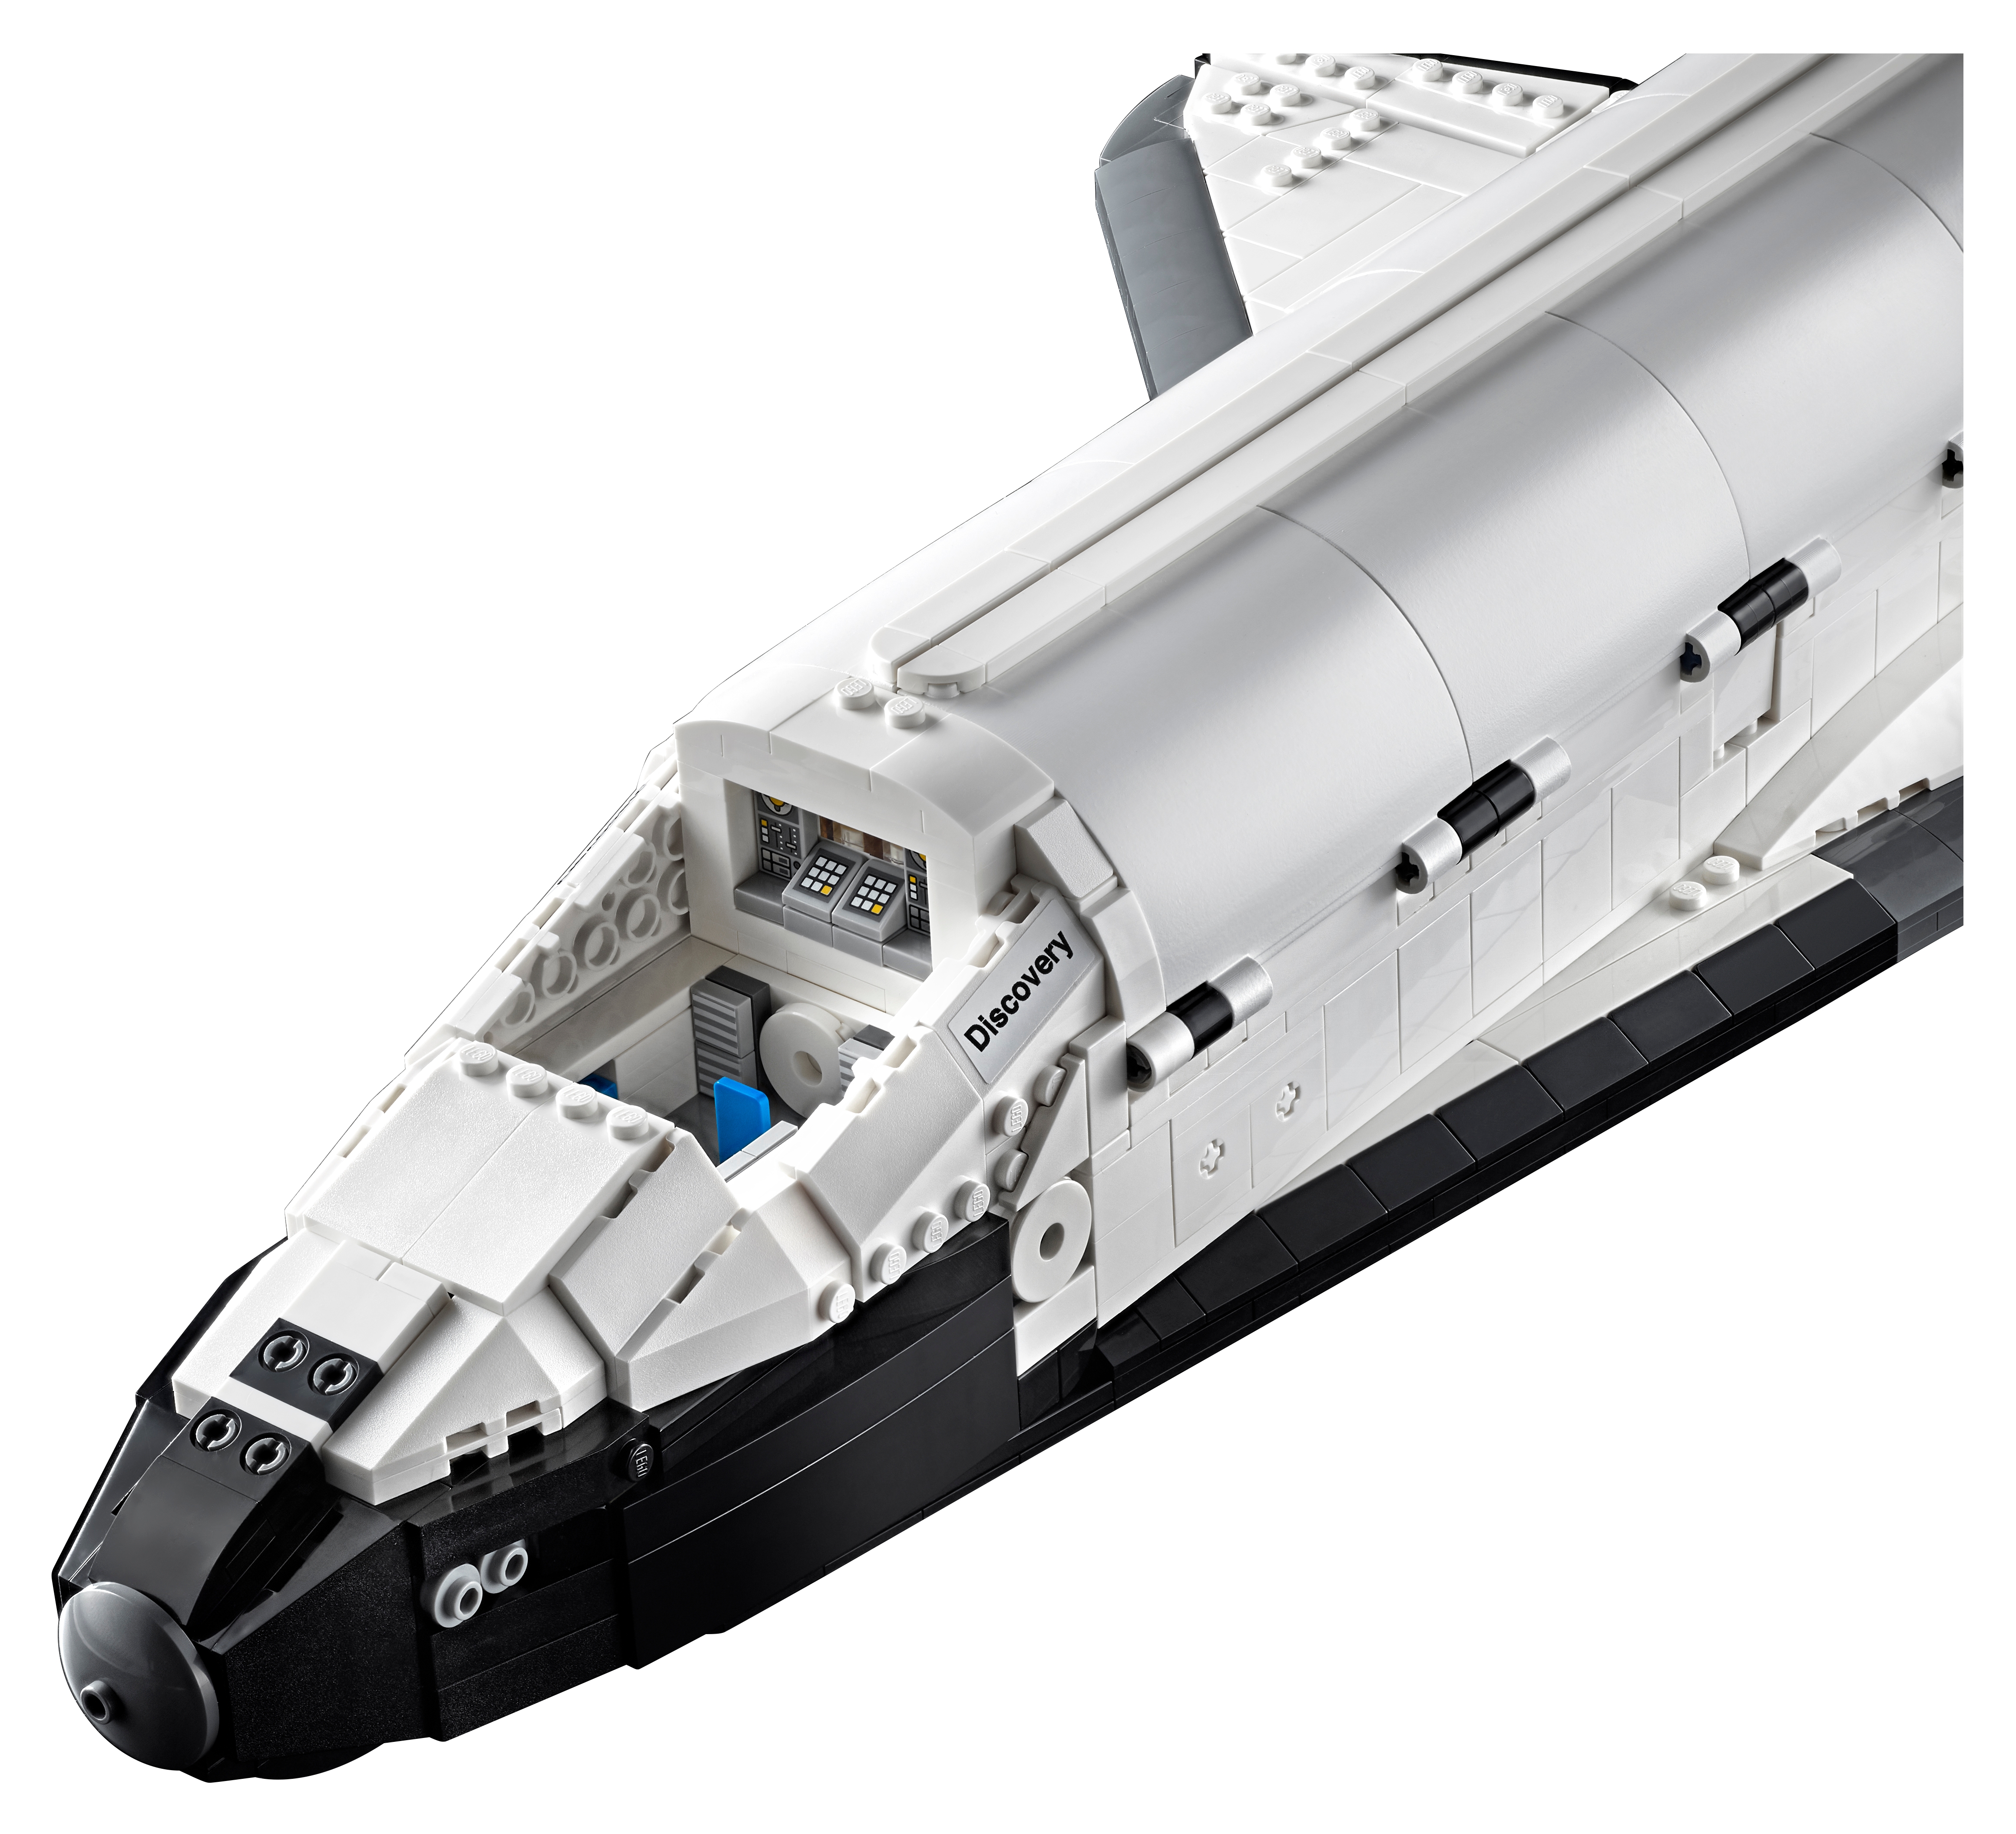 Rent LEGO set: NASA Space Shuttle Discovery at Lend-a-Brick